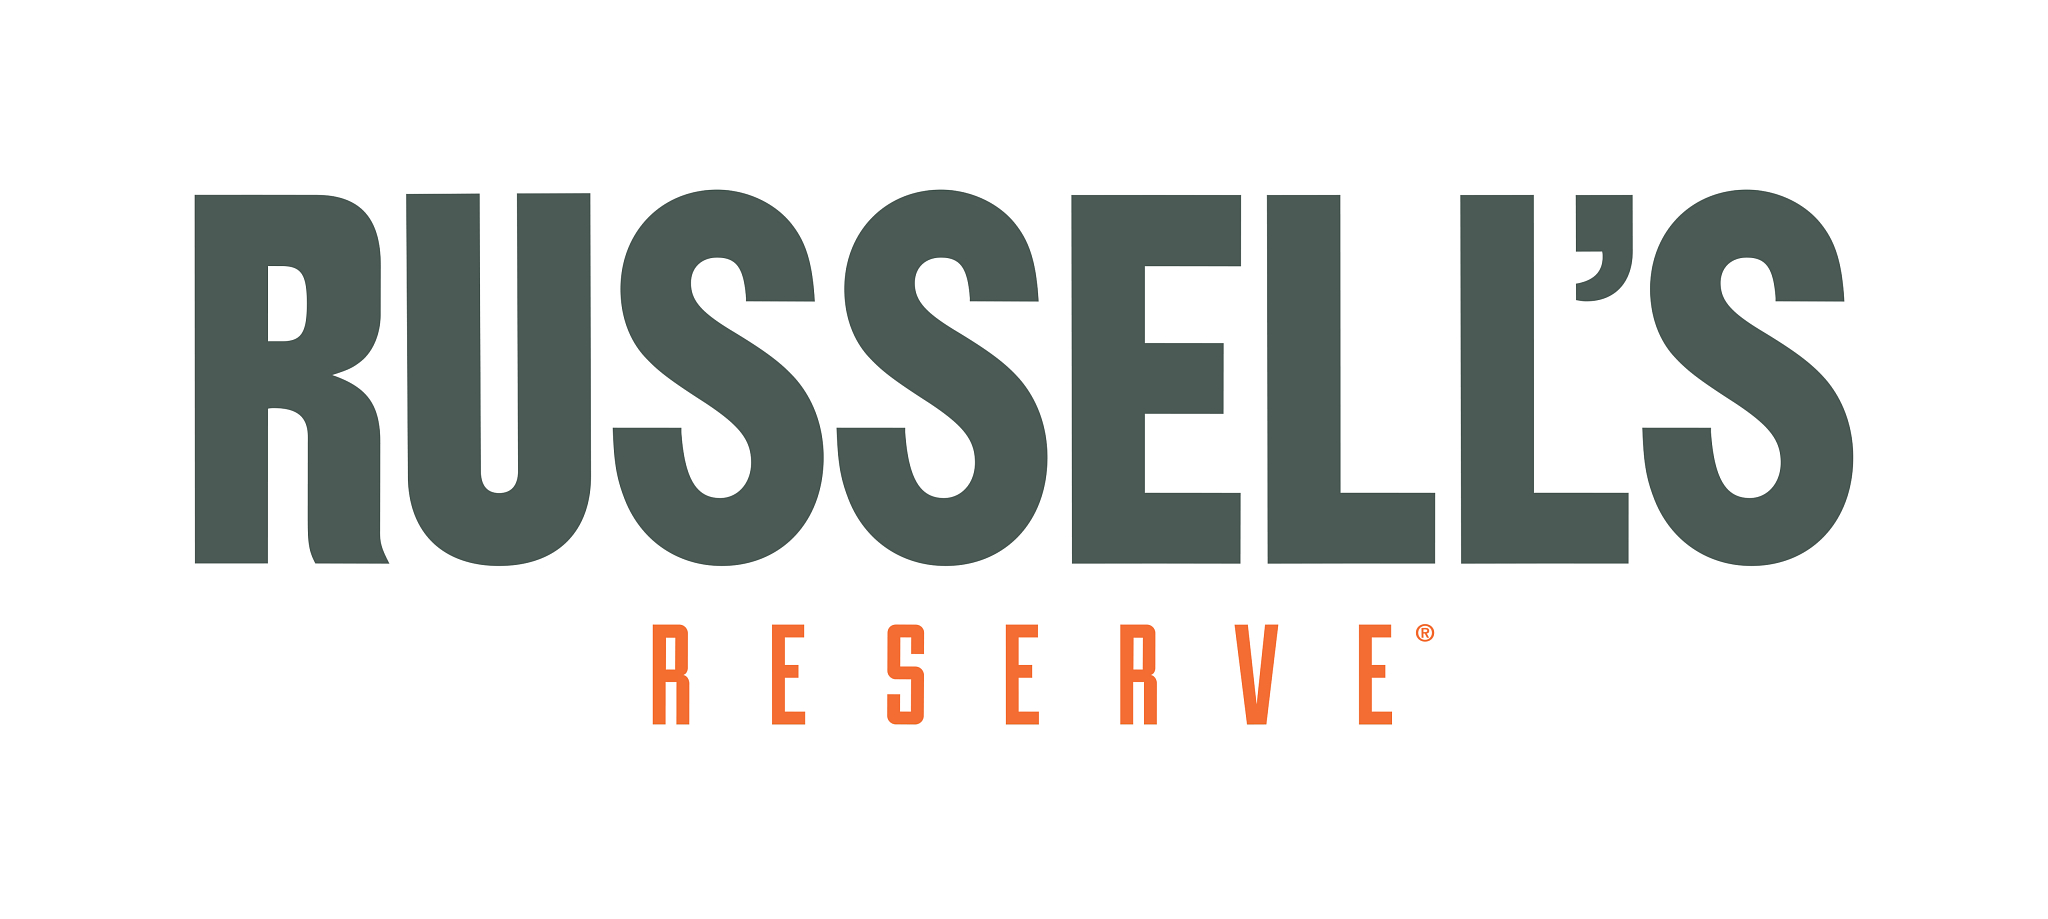 Russell's Reserve logo